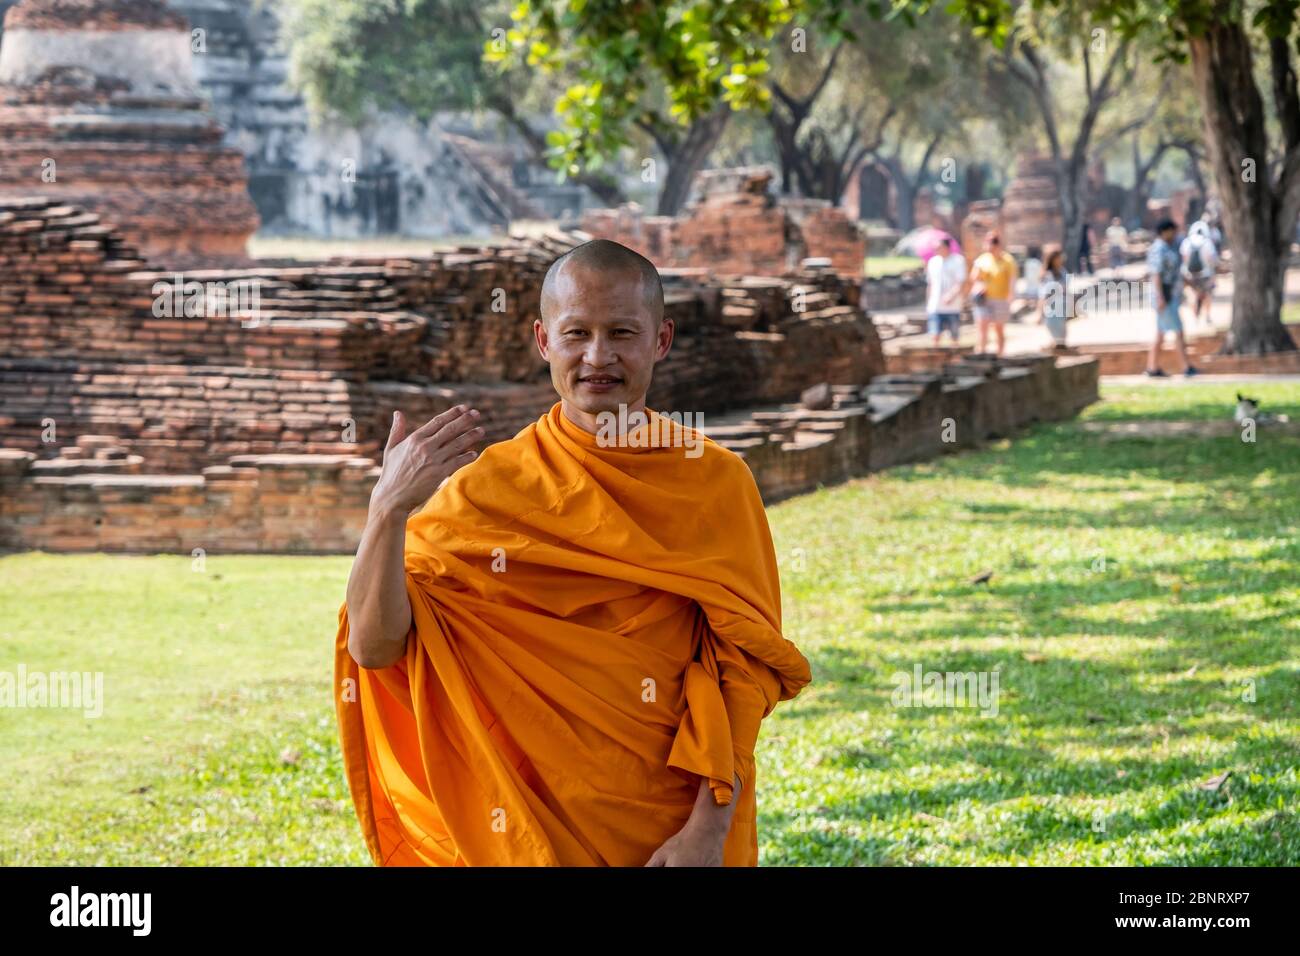 Ayutthaya, Bangkok / Thailand - February 9, 2020: Monk wearing orange clothes and the monk looking at the camera and he is smiling Stock Photo